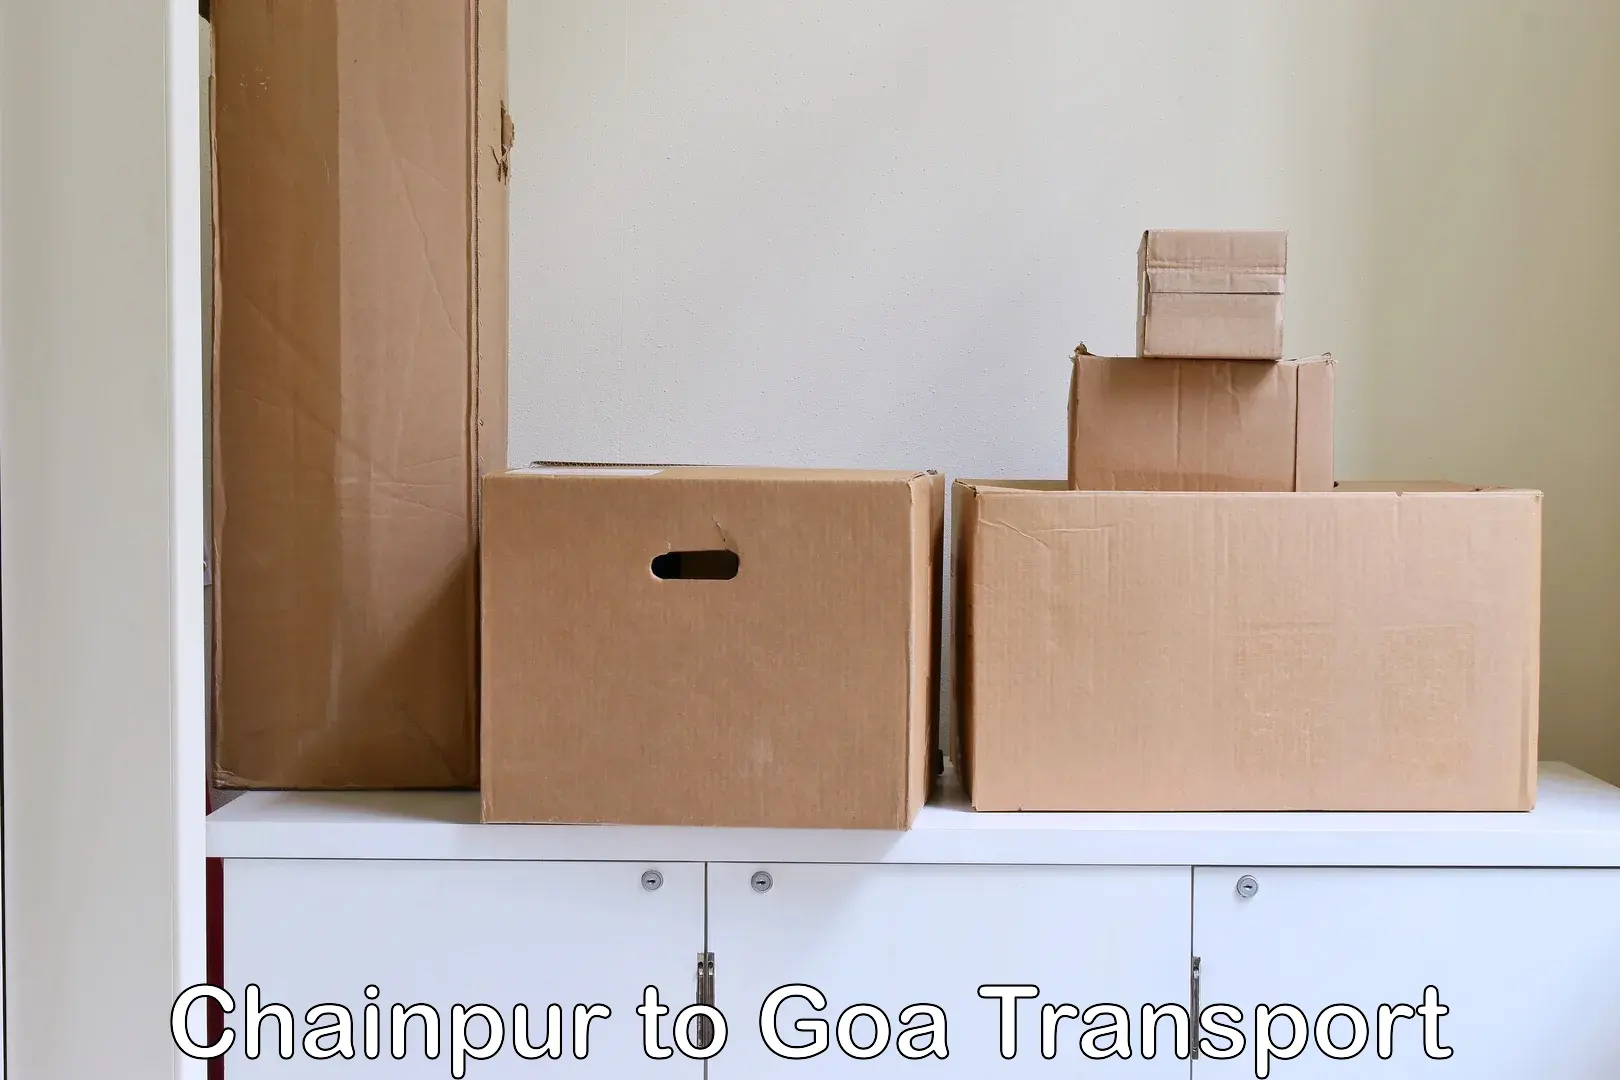 Container transport service Chainpur to Goa